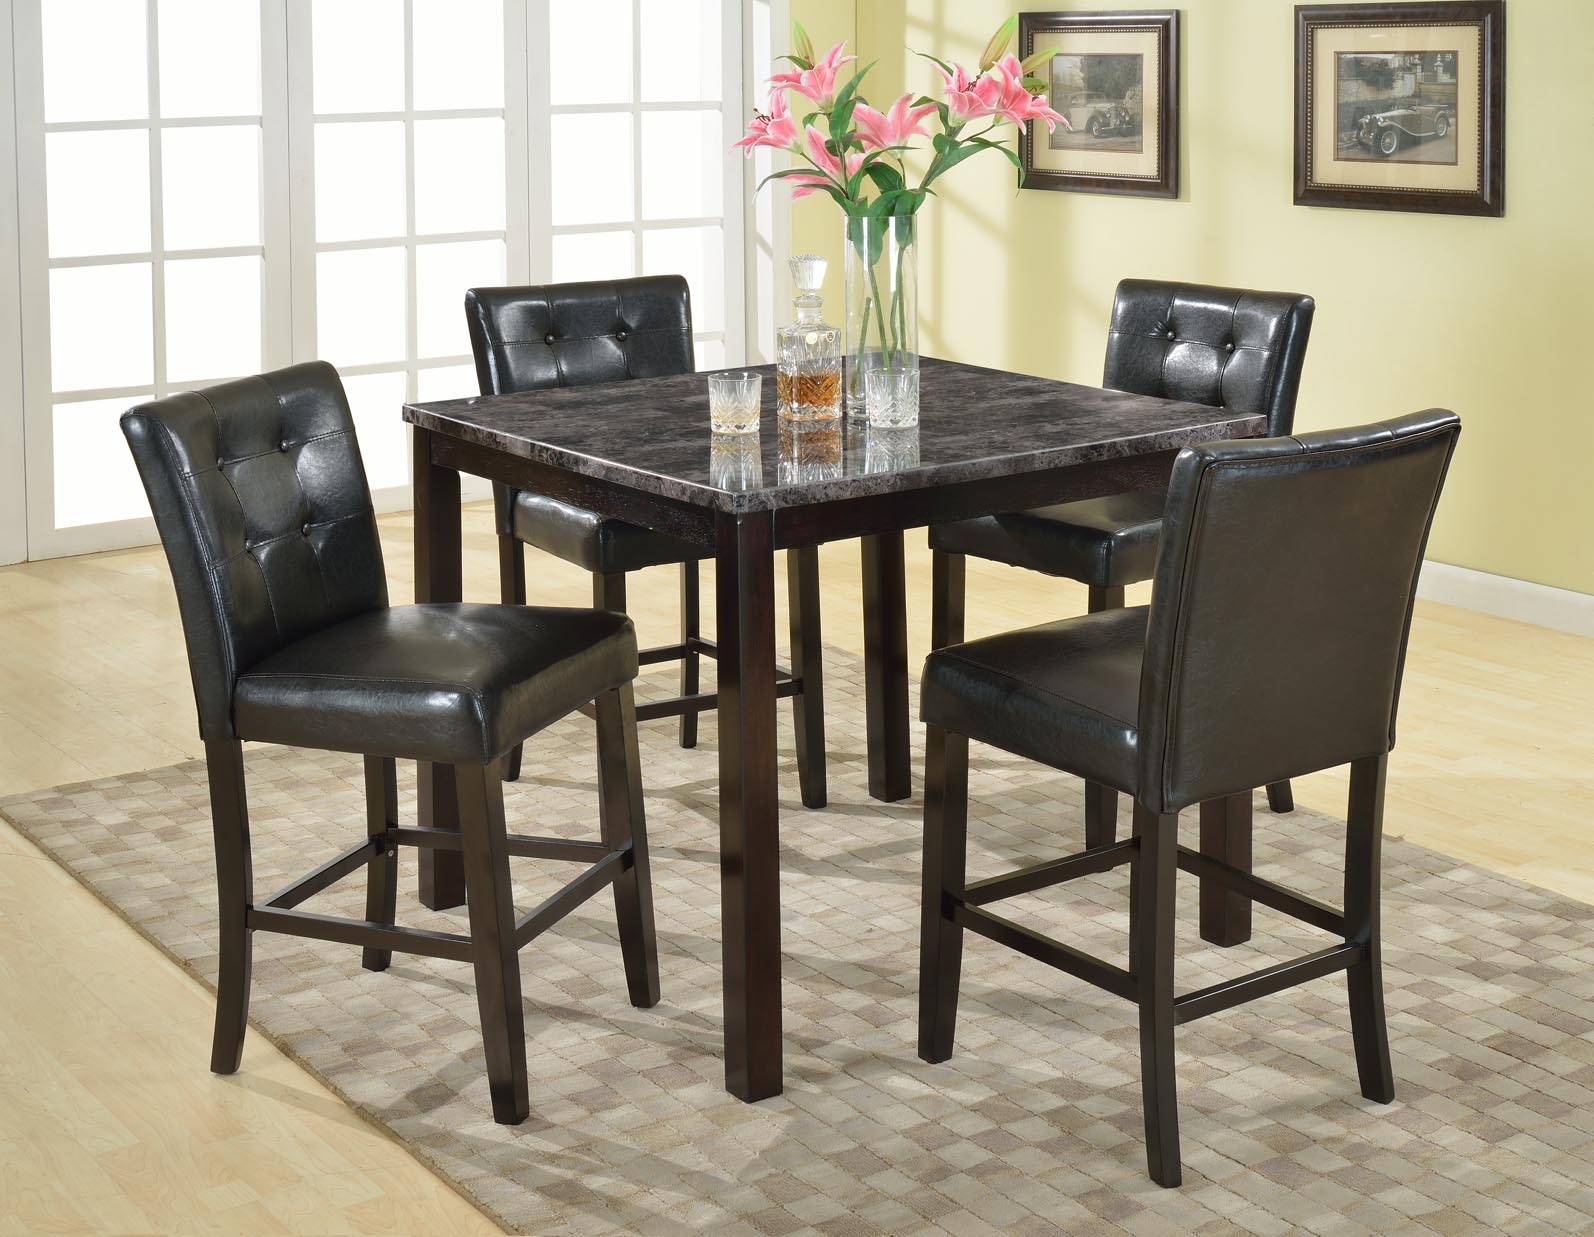 Roundhill Furniture 5-Piece Praia Artificial Dark Marble Top Pub Dining Table 4 Chairs Set